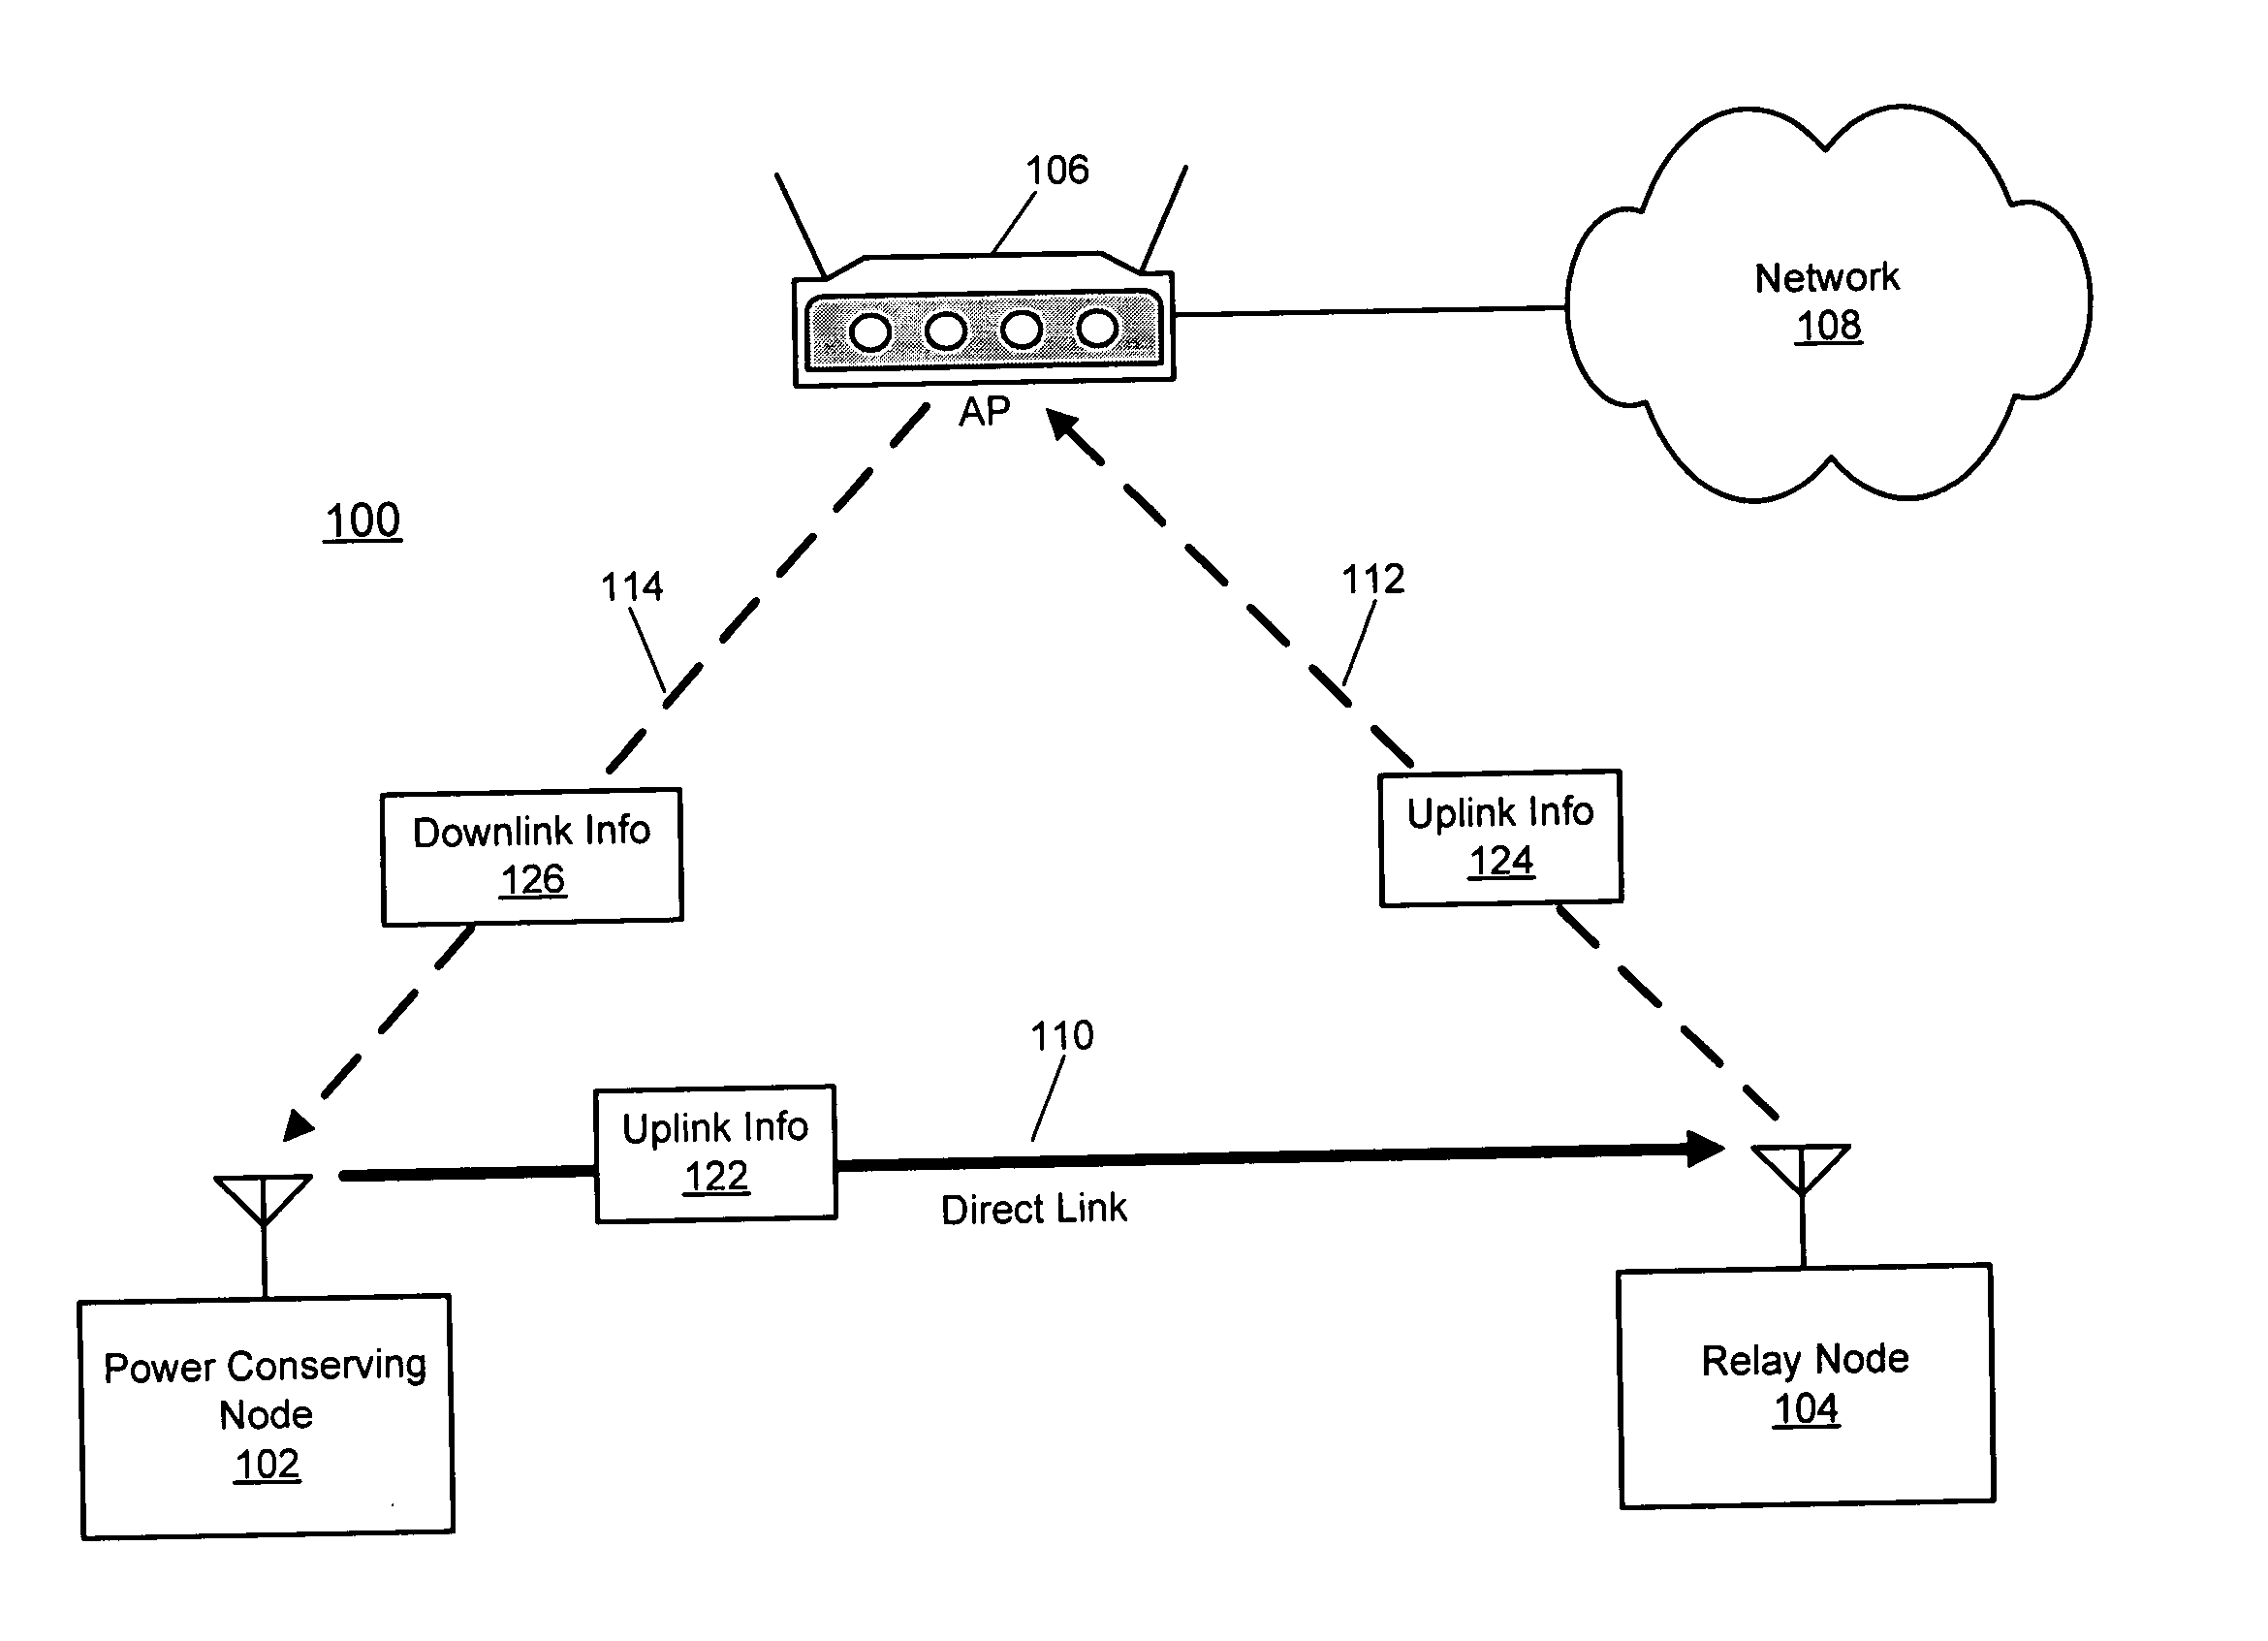 Direct link relay in a wireless network